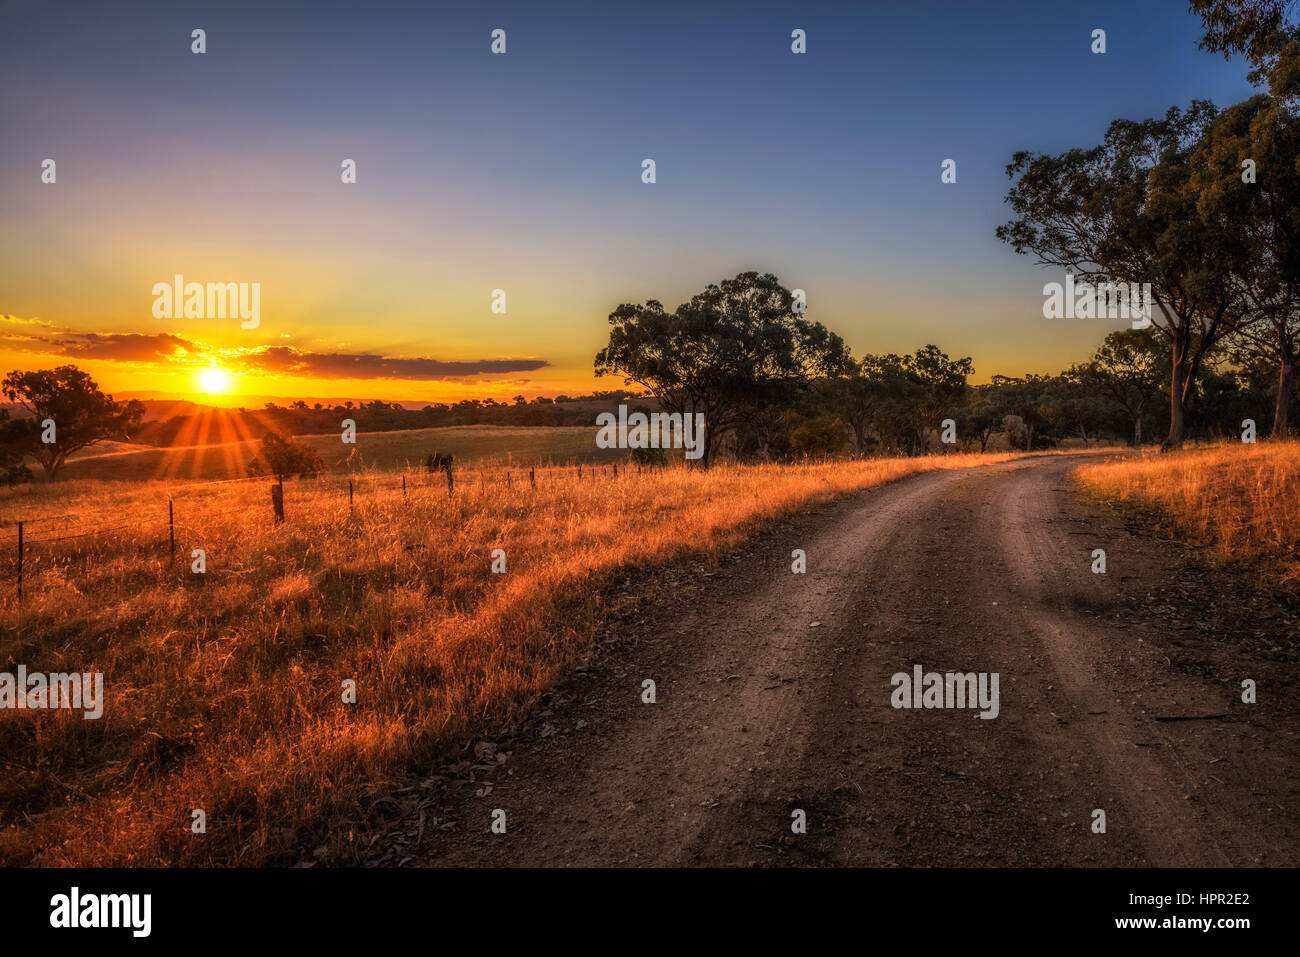 Scenic countryside landscape with rural dirt road at sunset in Australia Stock Photo